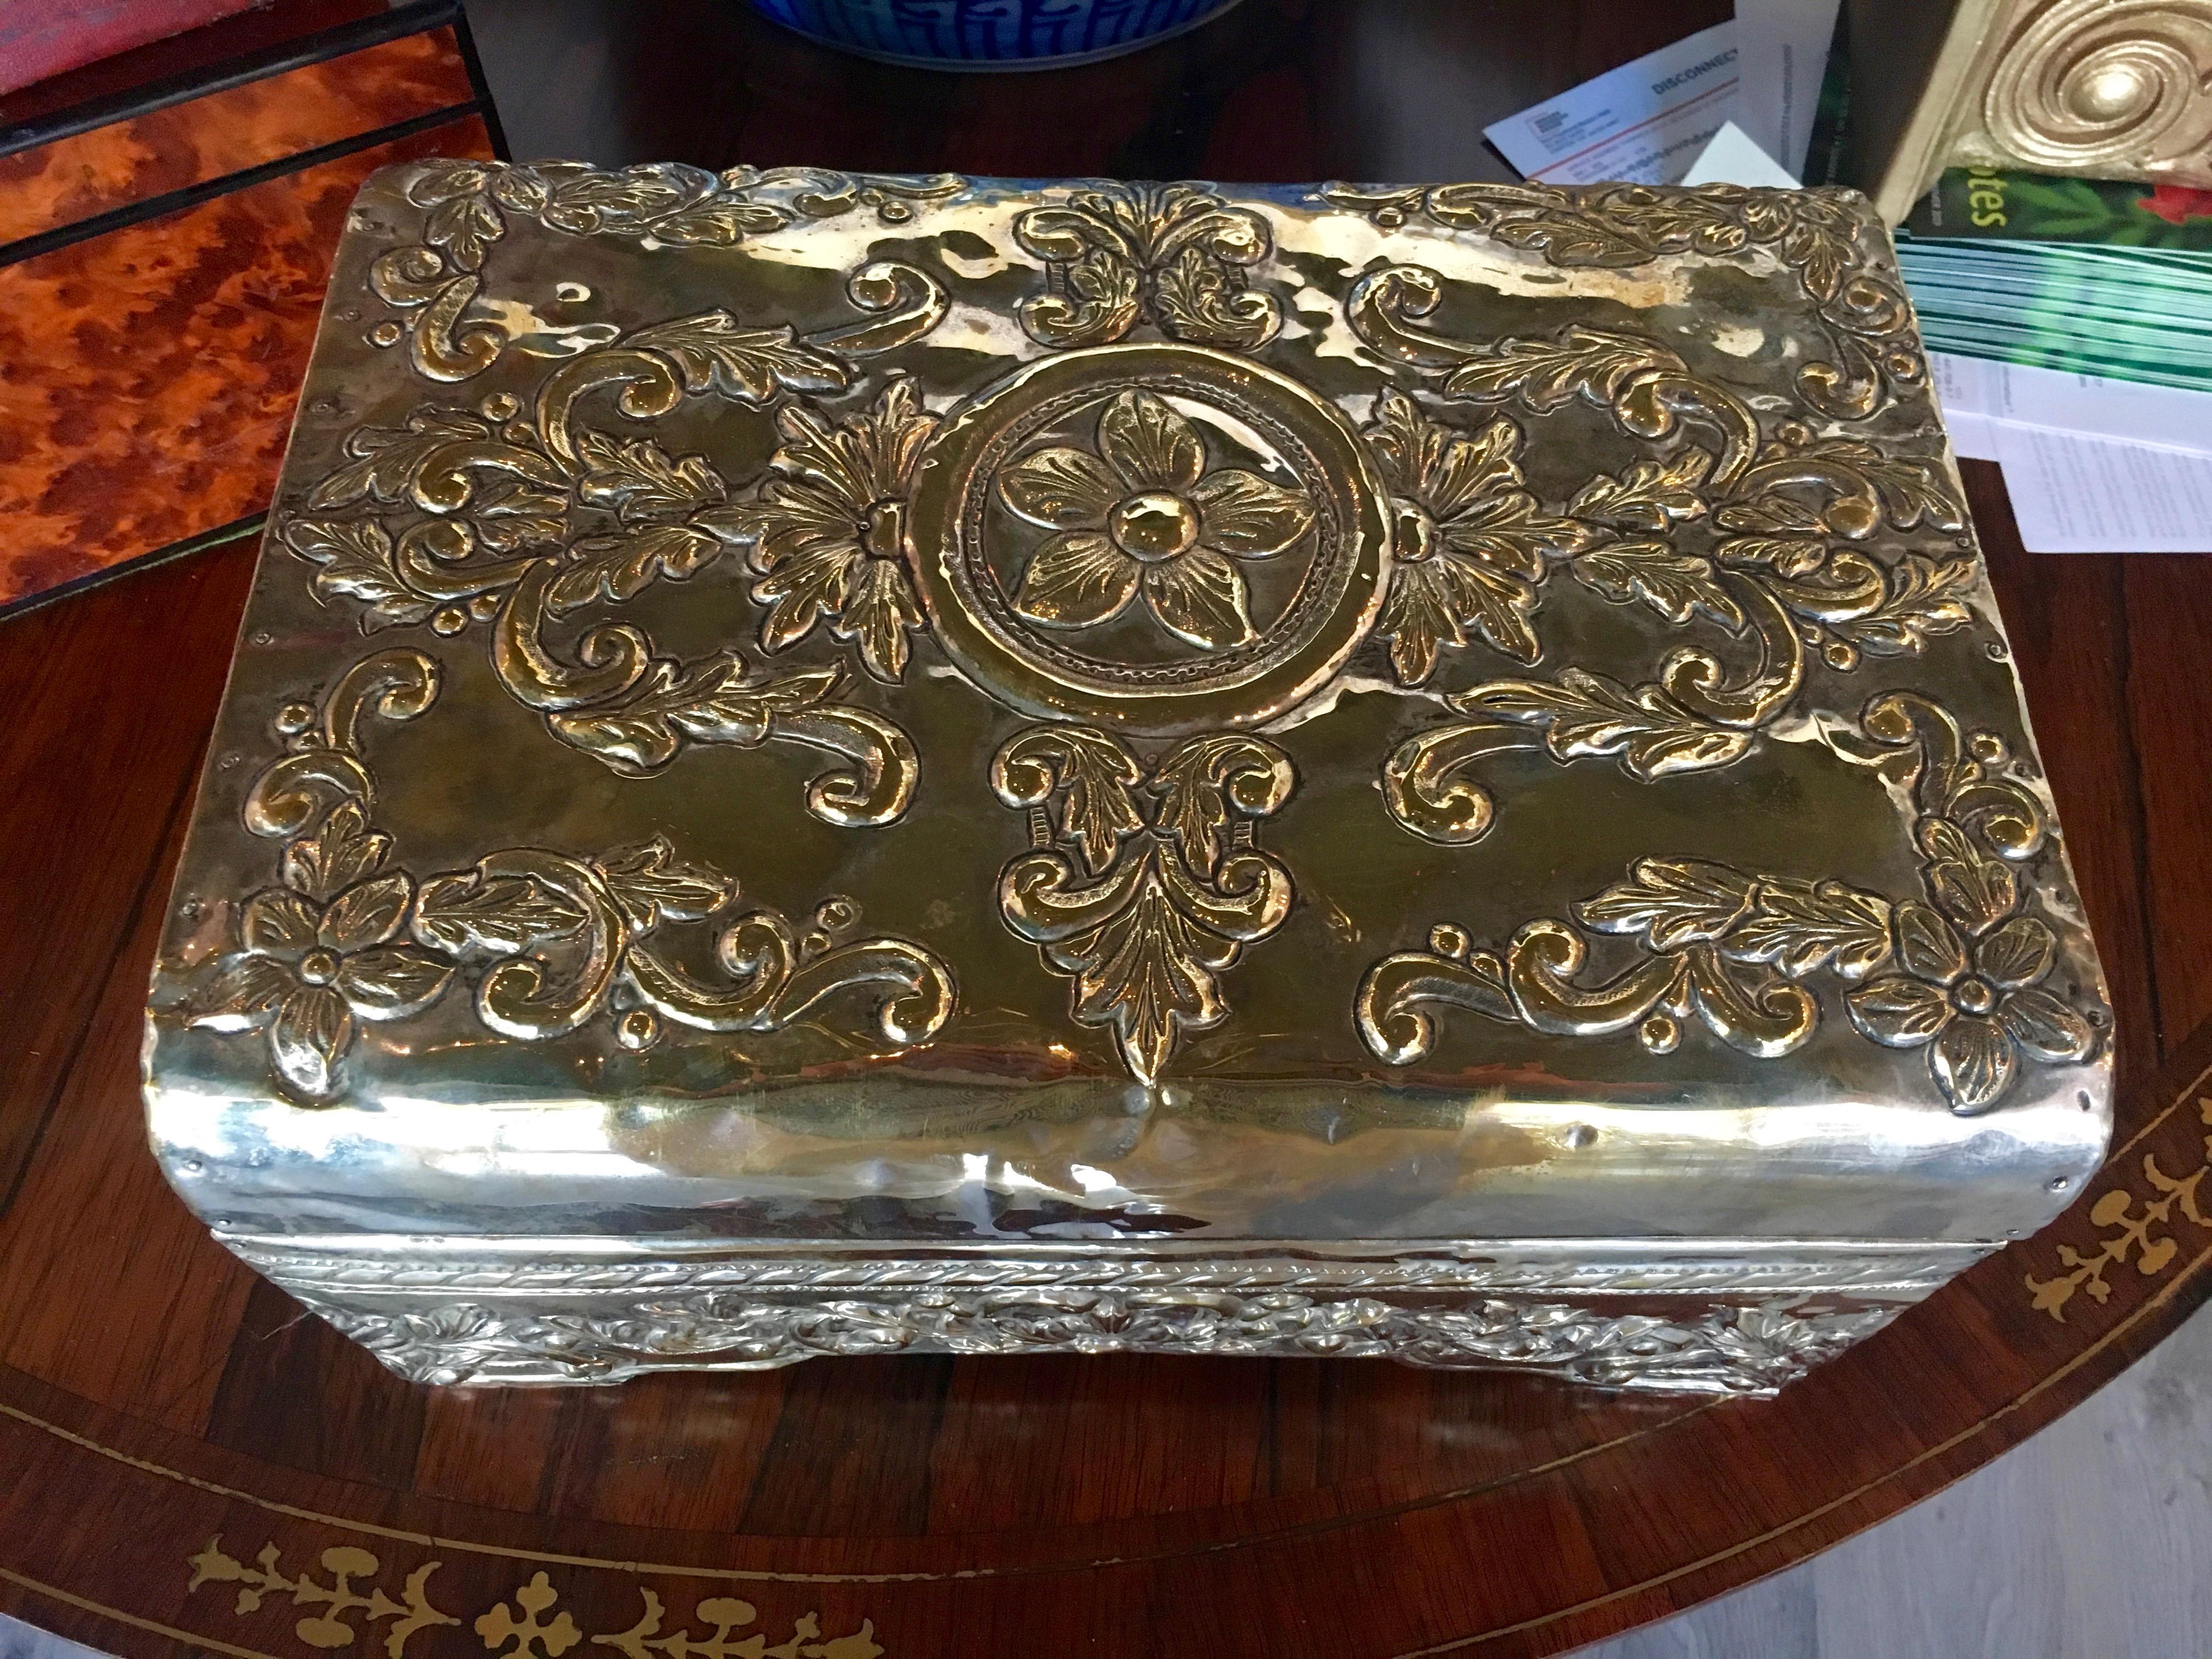 A silver-clad table casket

the domed hinge top centered with a paterae among foliate scrolls. 
apparently unmarked This has a golden patina.
Height 7 1/2 x width 14 x depth 10 inches.